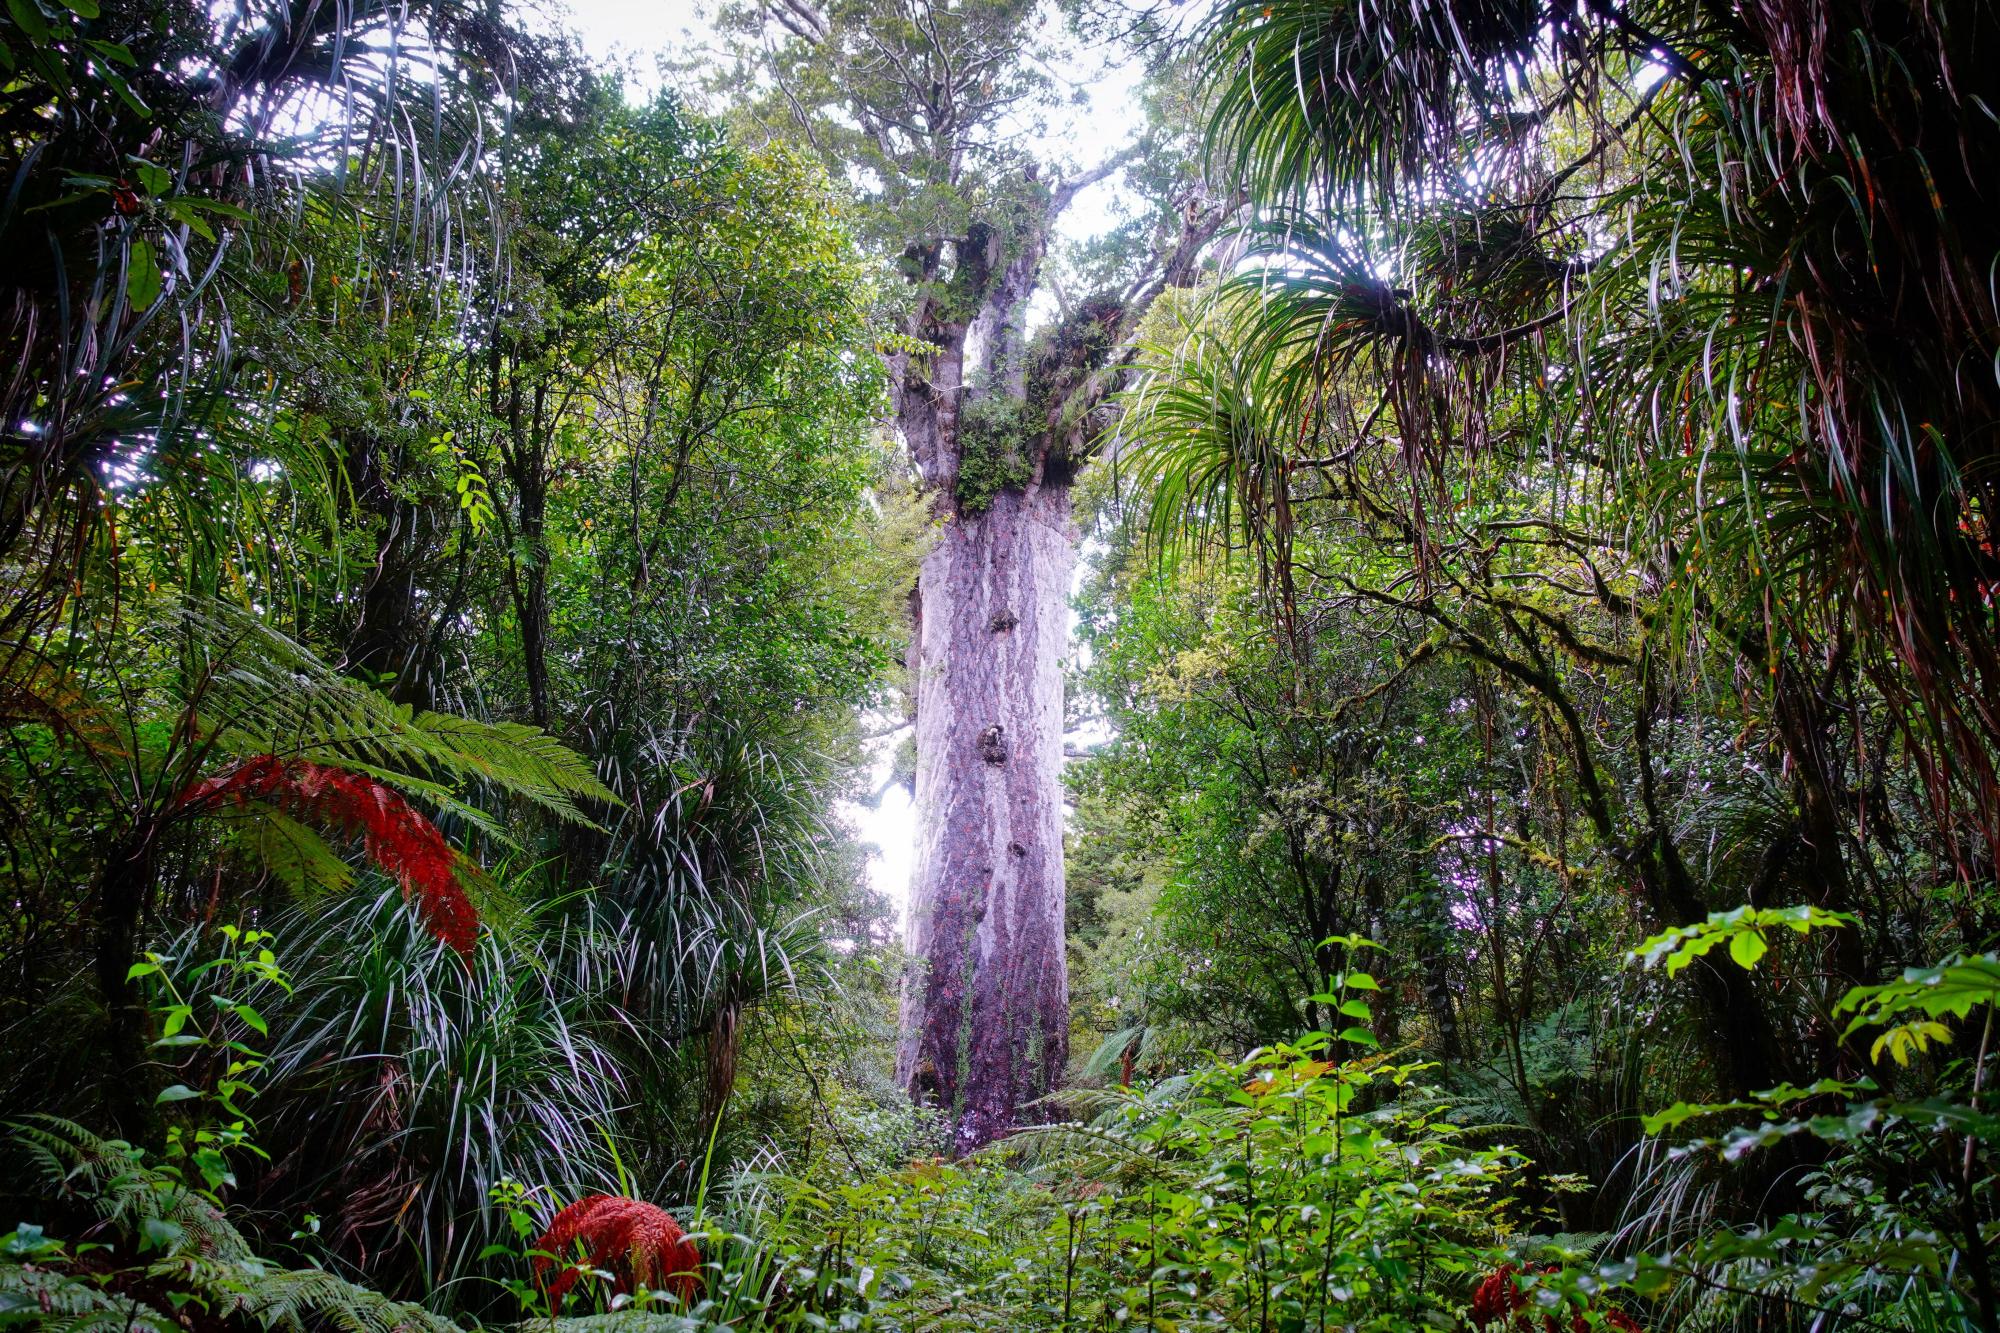 Salvation of New Zealand’s dying giant kauri trees may have roots in Māori wisdom